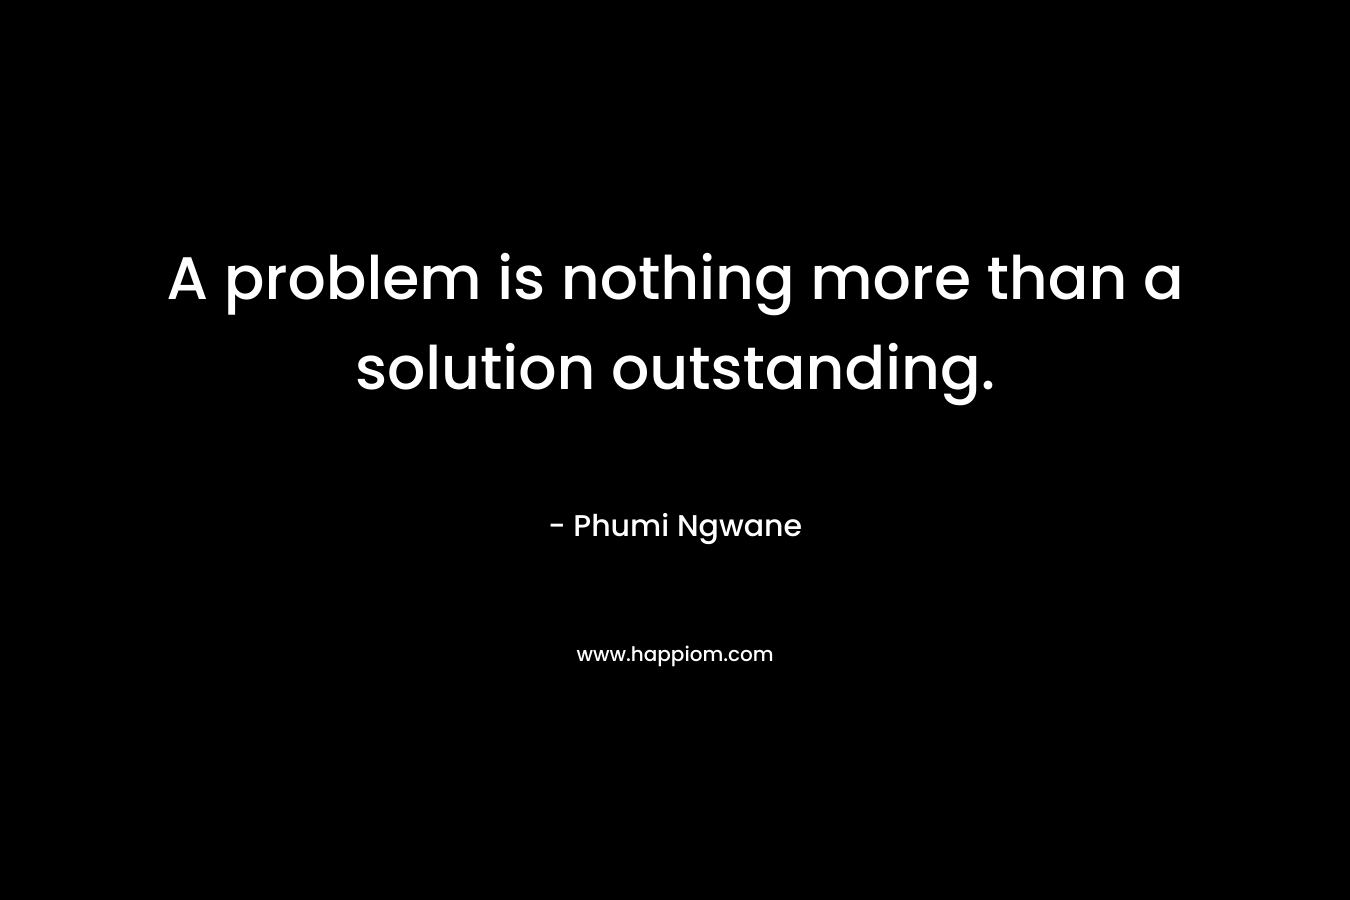 A problem is nothing more than a solution outstanding. – Phumi Ngwane